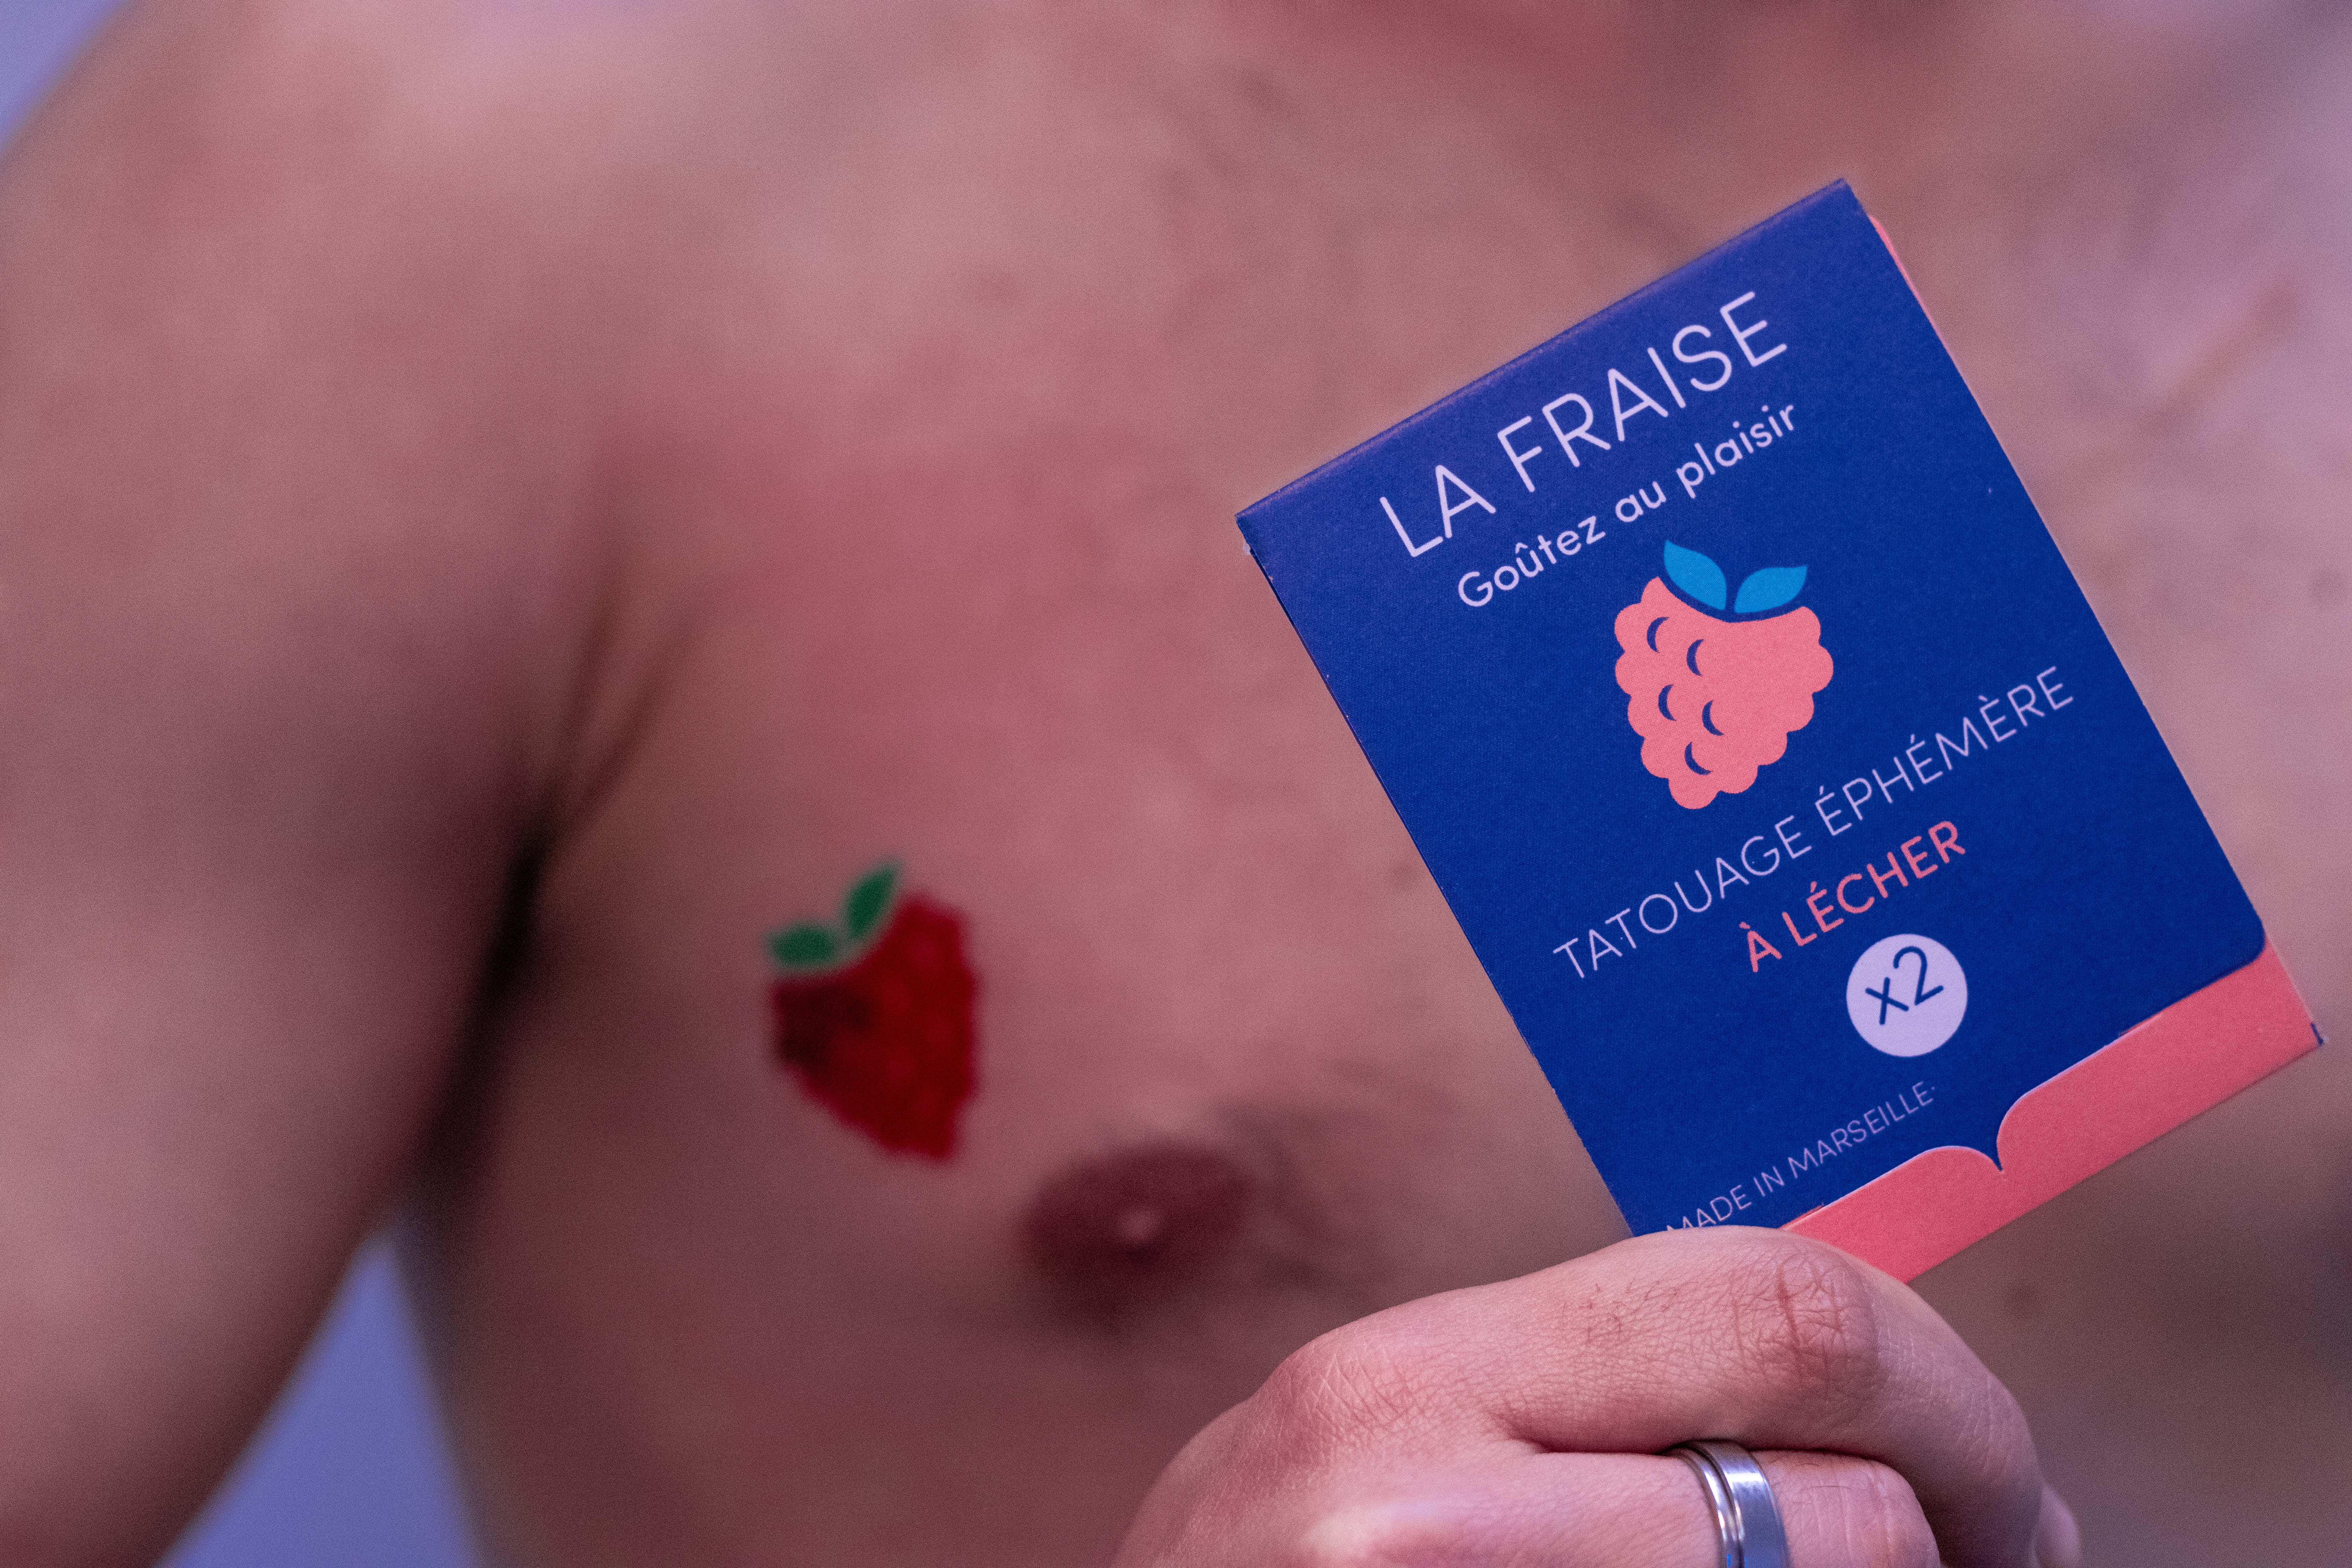 Image packaging lafraise_tattoo